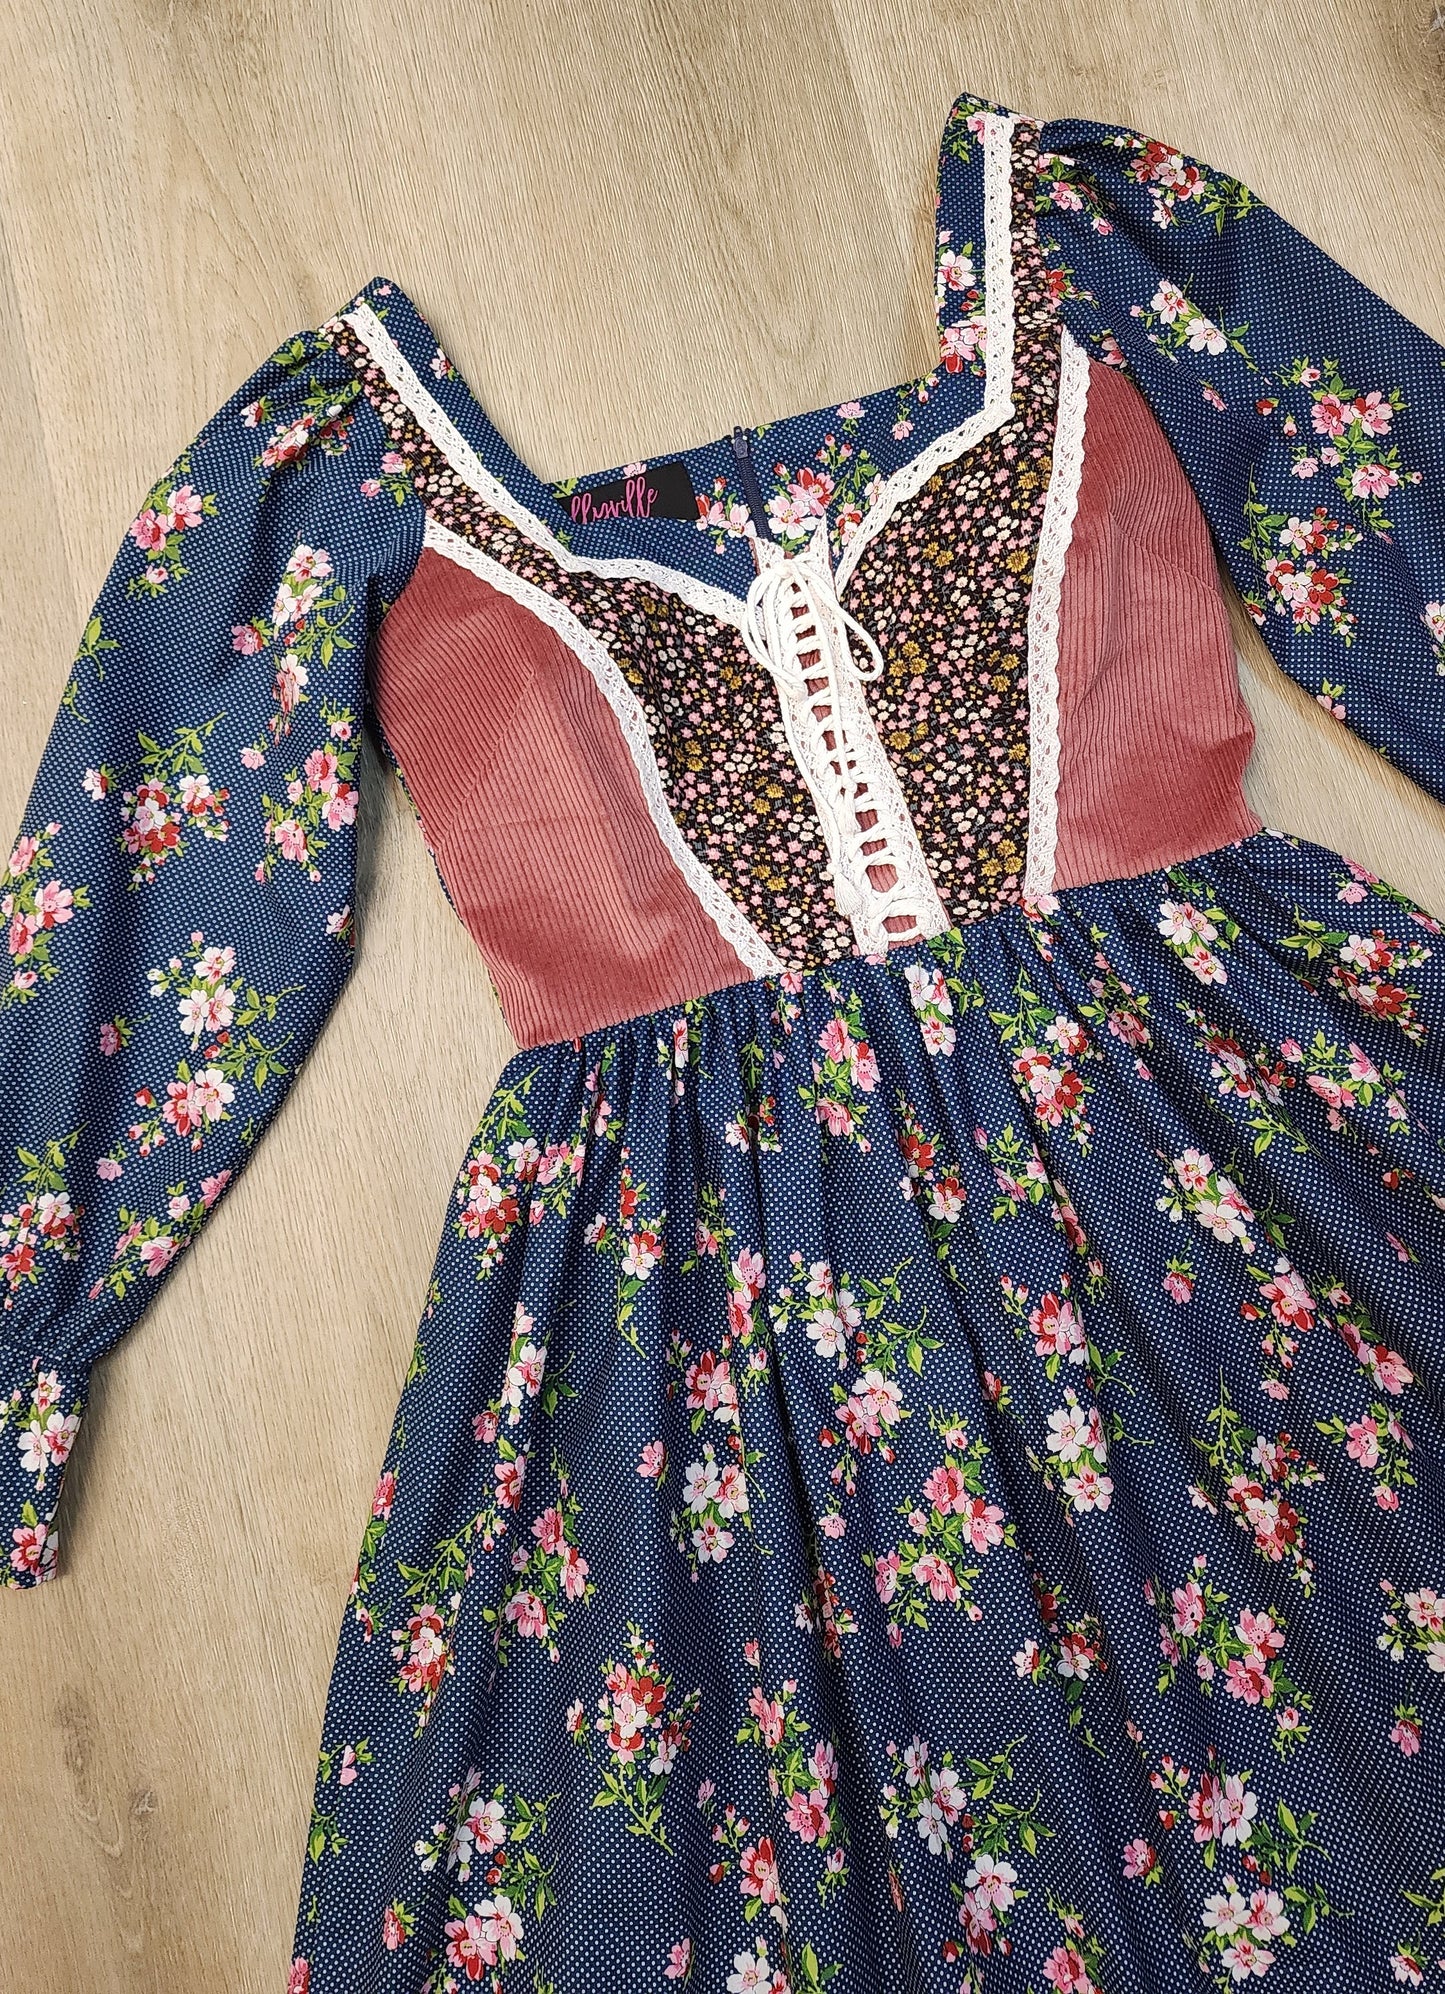 An Original Homespun 1970's Vintage Inspired Floral Print Corset Lace Dress by Hollyville